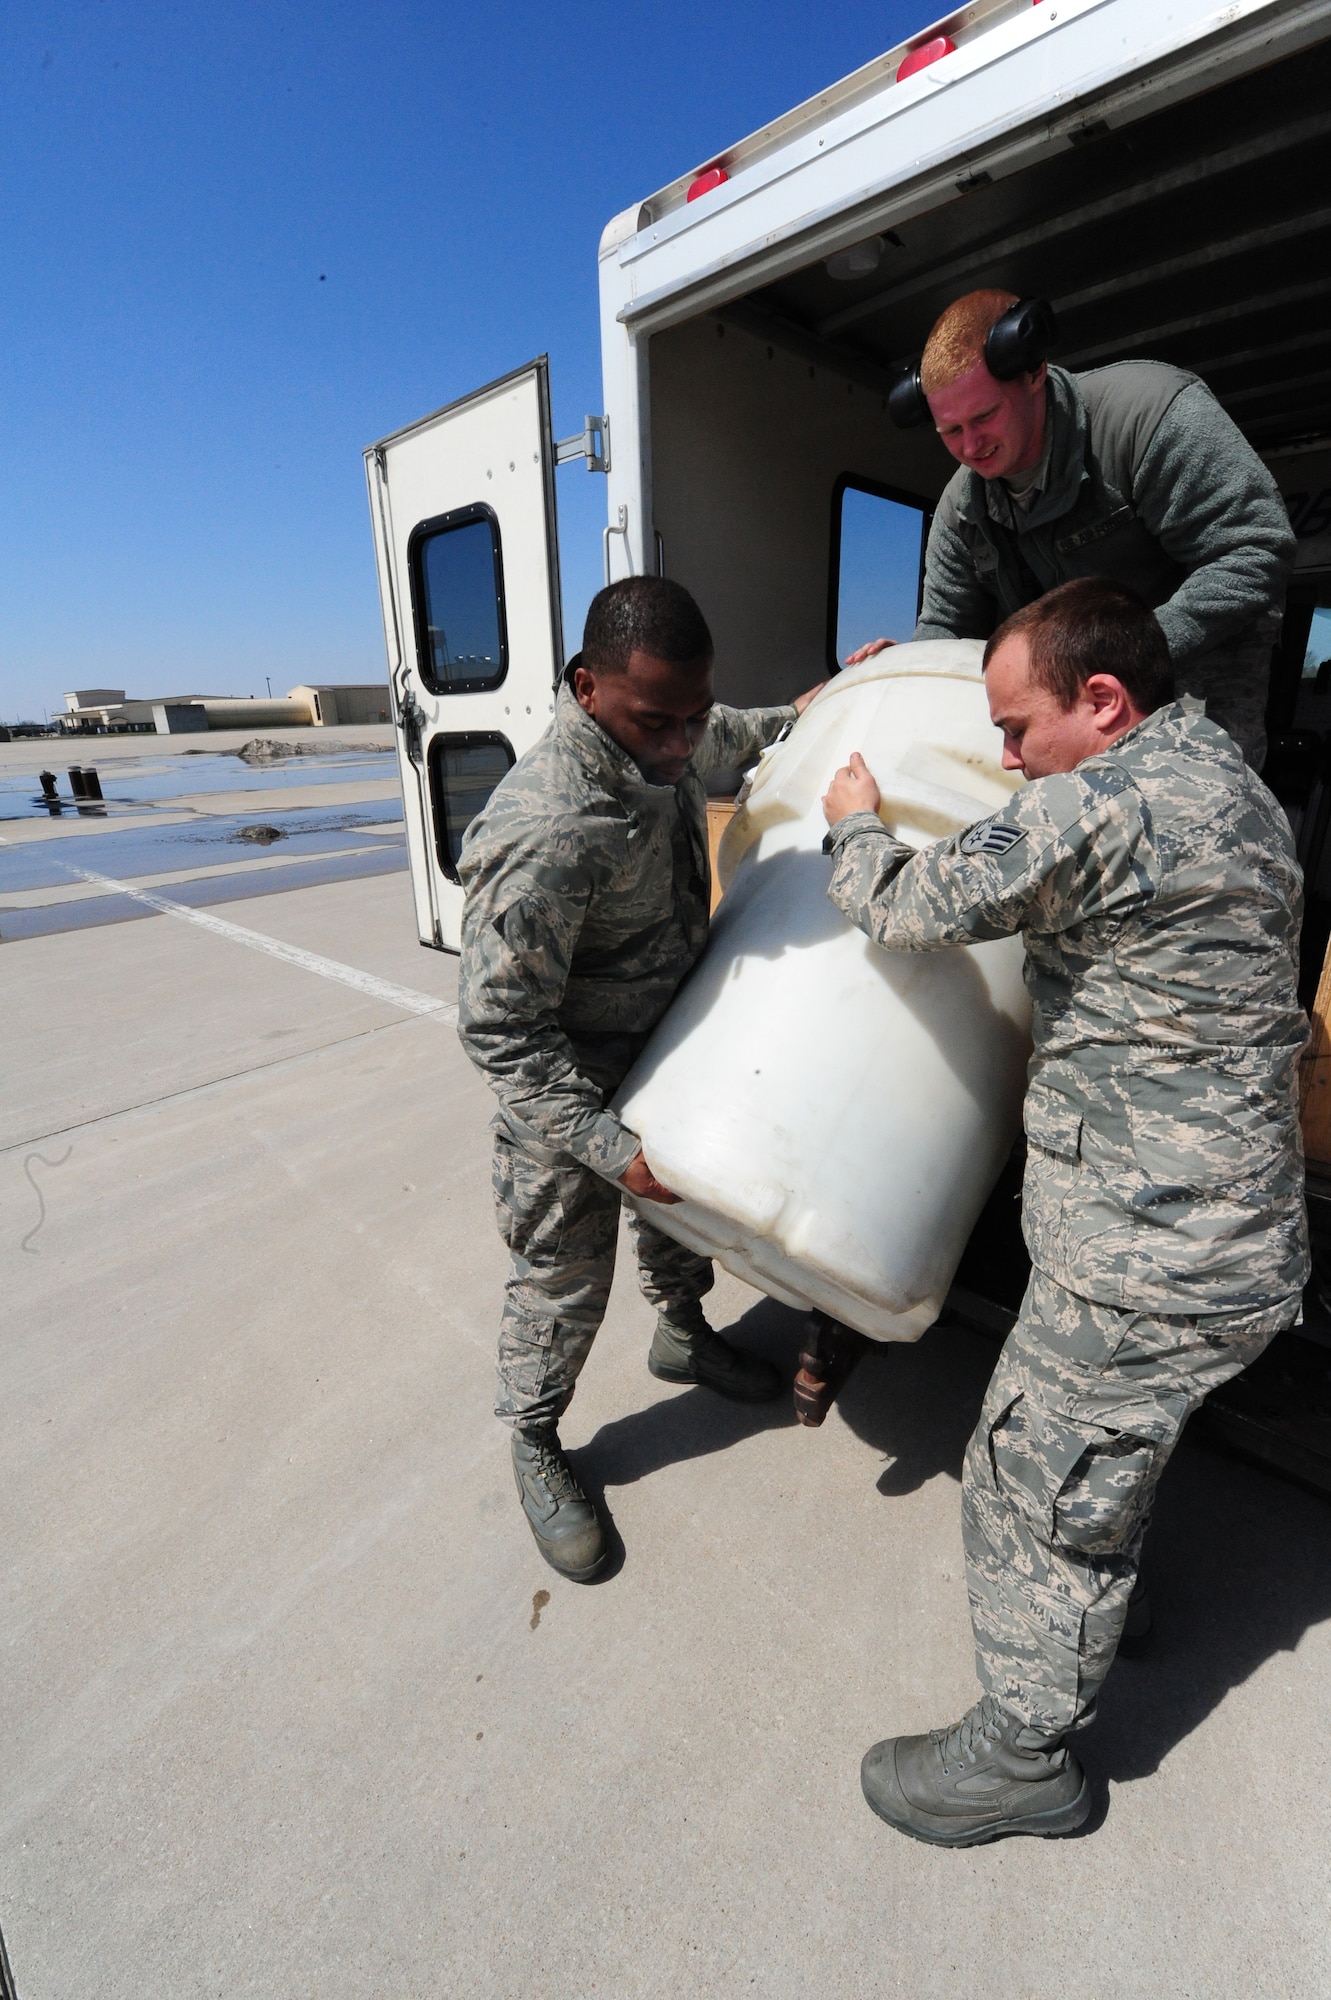 Airmen 1st Class Steven McCray, and James Fulton, 13th Aircraft Maintenance Unit crew chiefs, and Senior Airman Sean Hegstad, 13th AMU crew chief, lift a white barrel spill kit at Whiteman Air Force Base, April 5, 2013. The spill kit was used for an engine-running crew change later that day. (U.S. Air Force photo by Staff Sgt. Nick Wilson/Released)